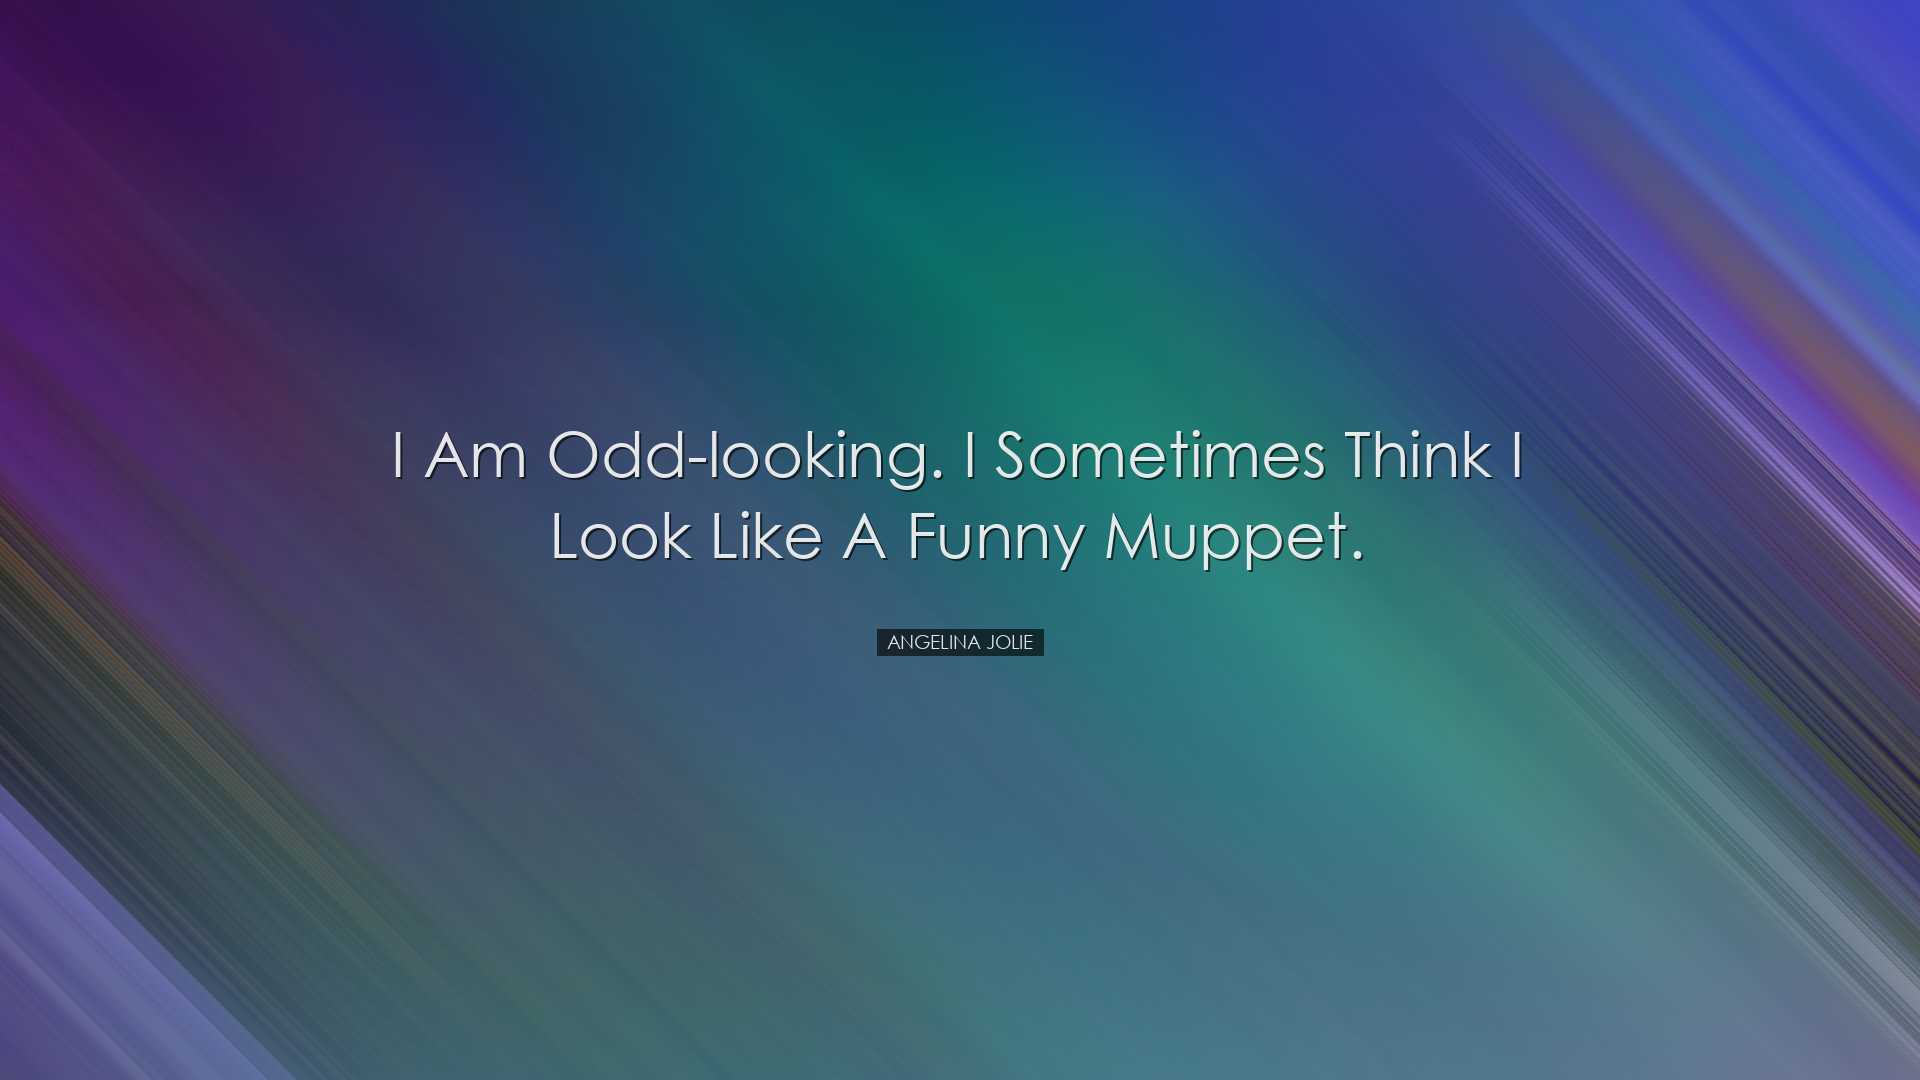 I am odd-looking. I sometimes think I look like a funny Muppet. -